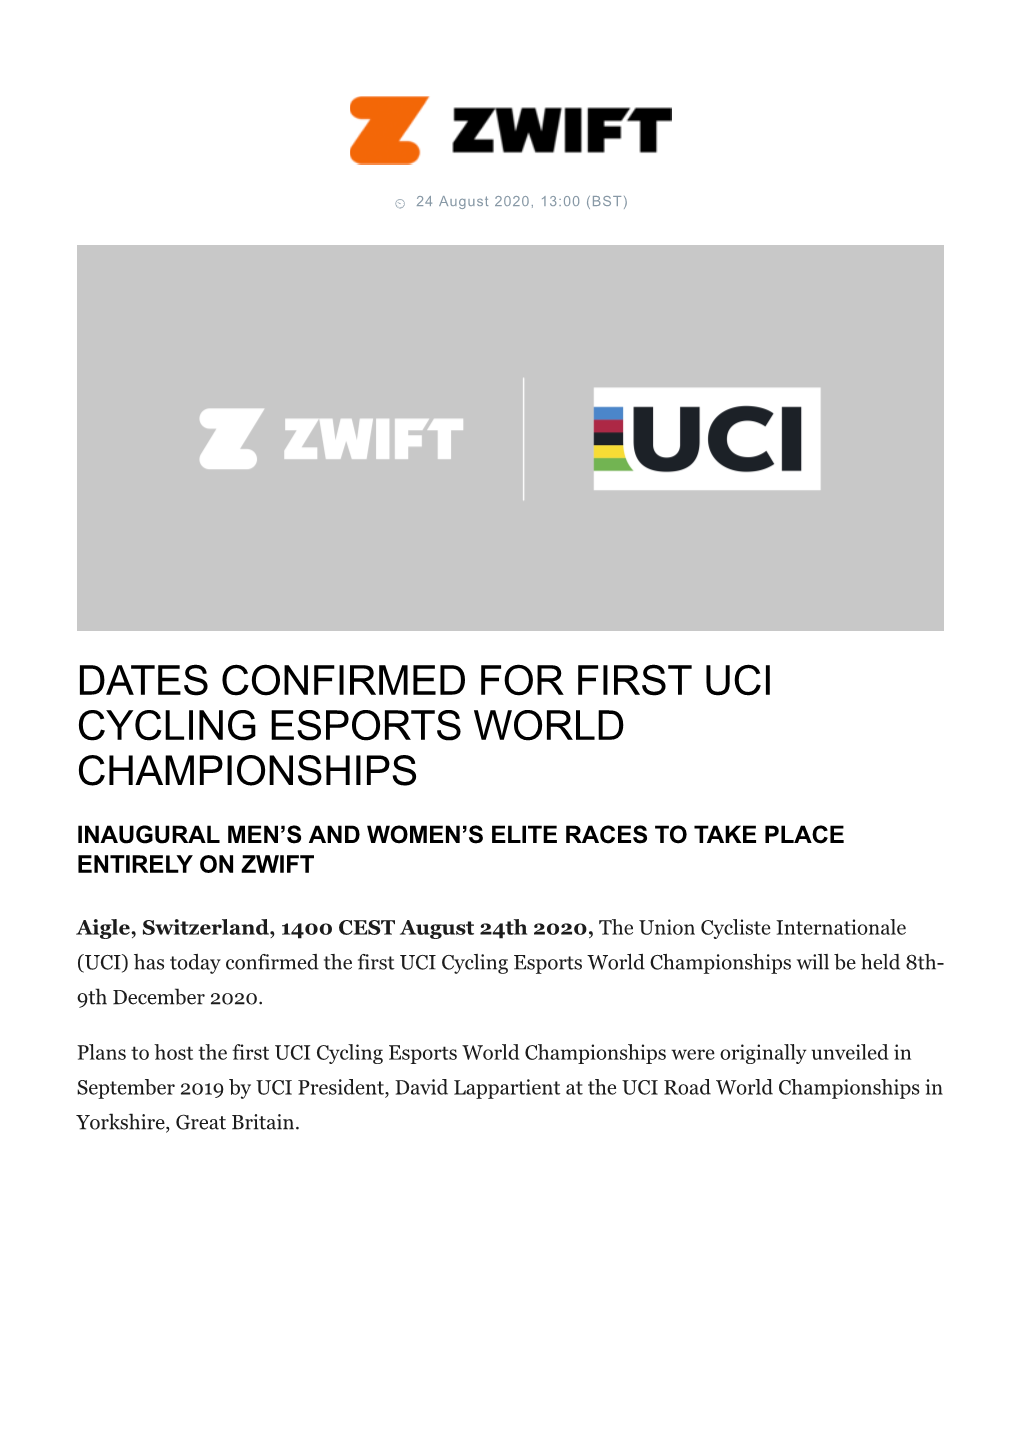 Dates Confirmed for First Uci Cycling Esports World Championships